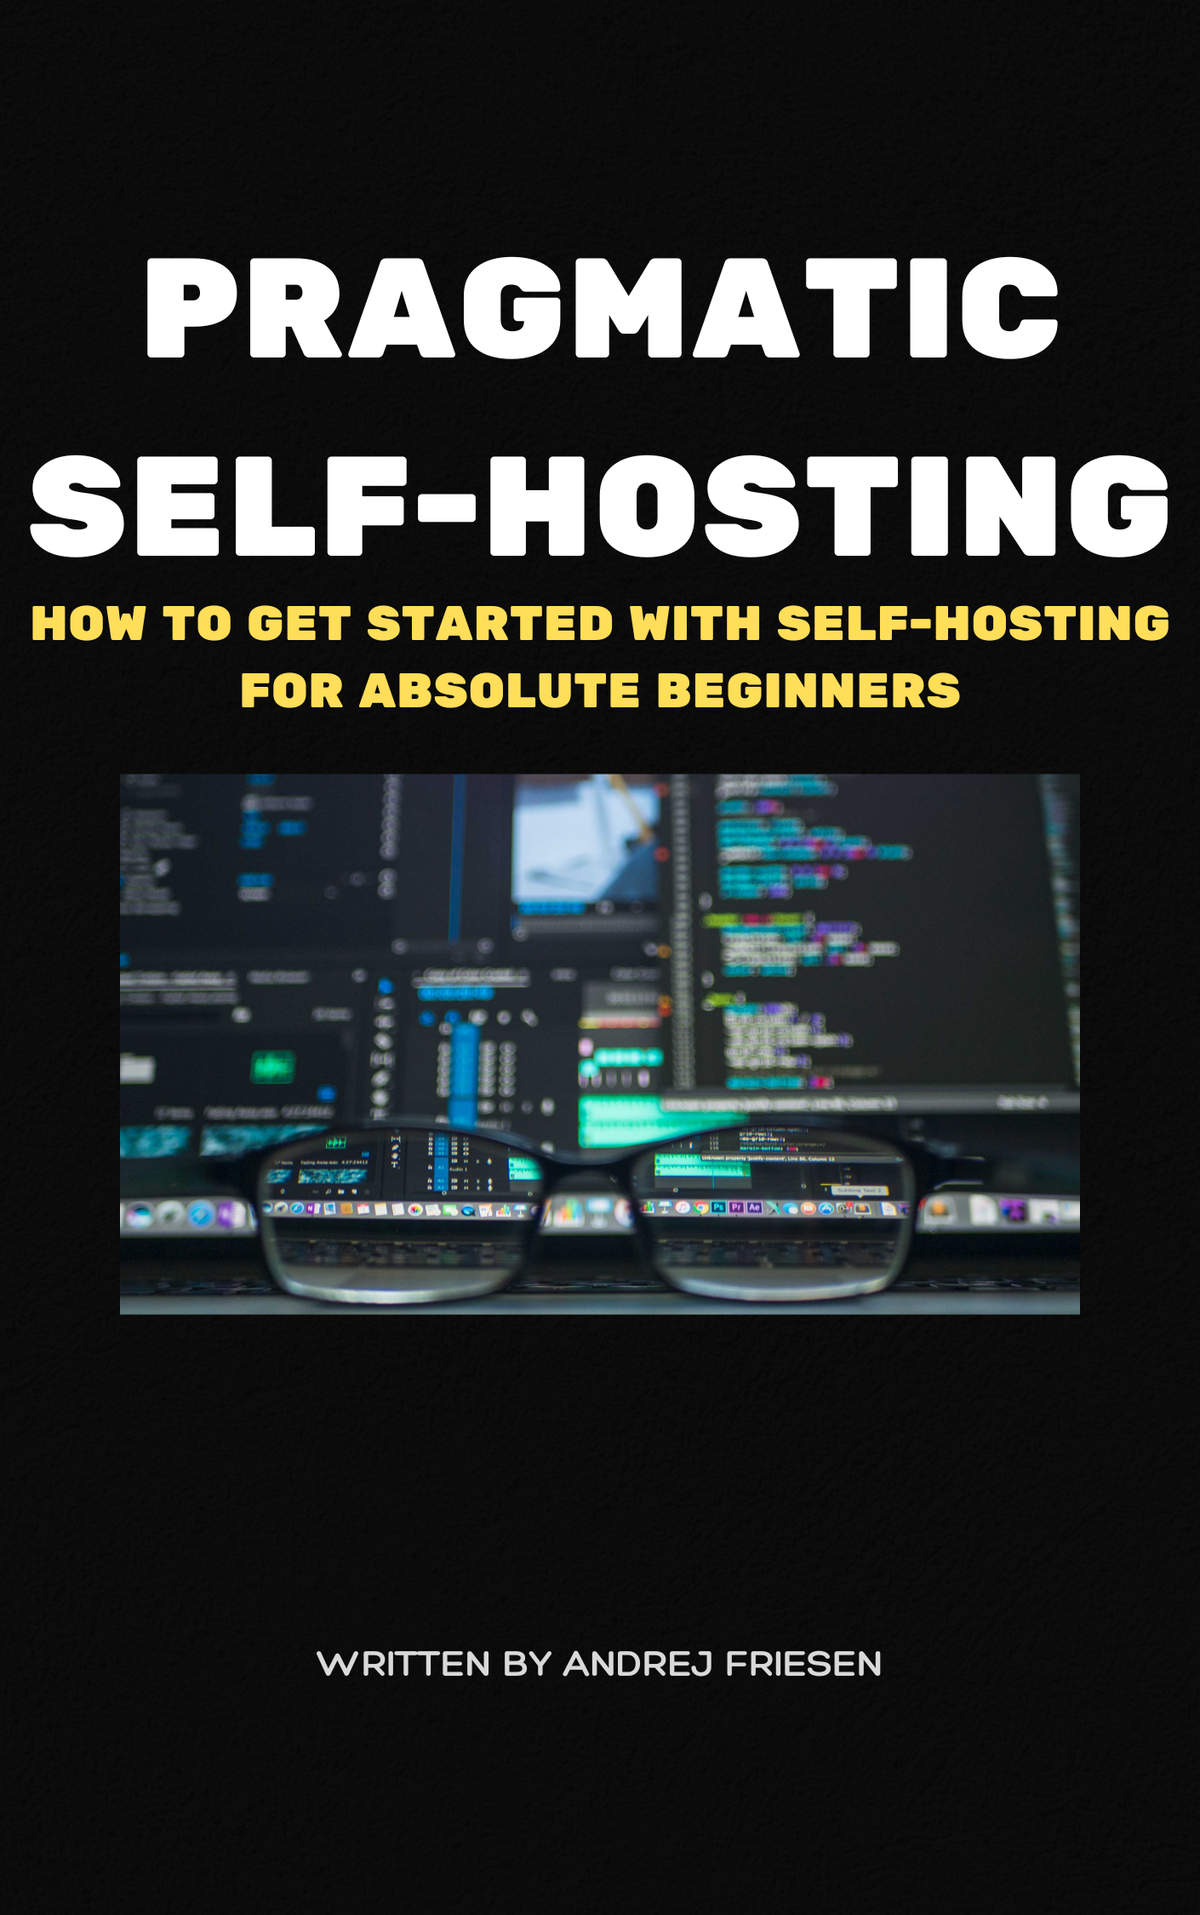 Sign up for my book: Pragmatic Self-Hosted